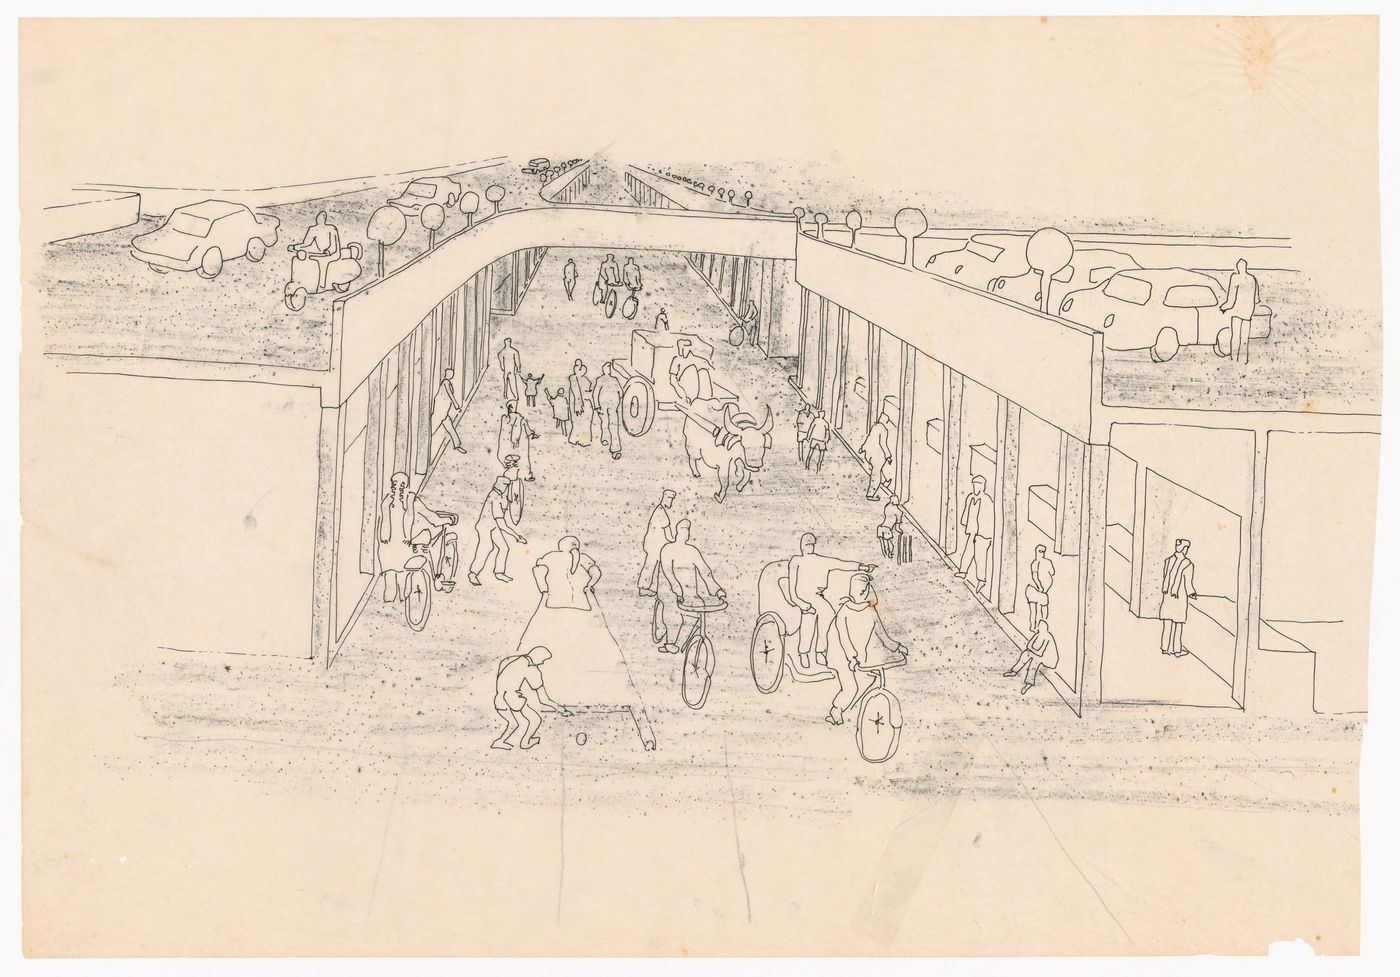 Perspective sketch of shop level for Linear city, Chandigarh, India